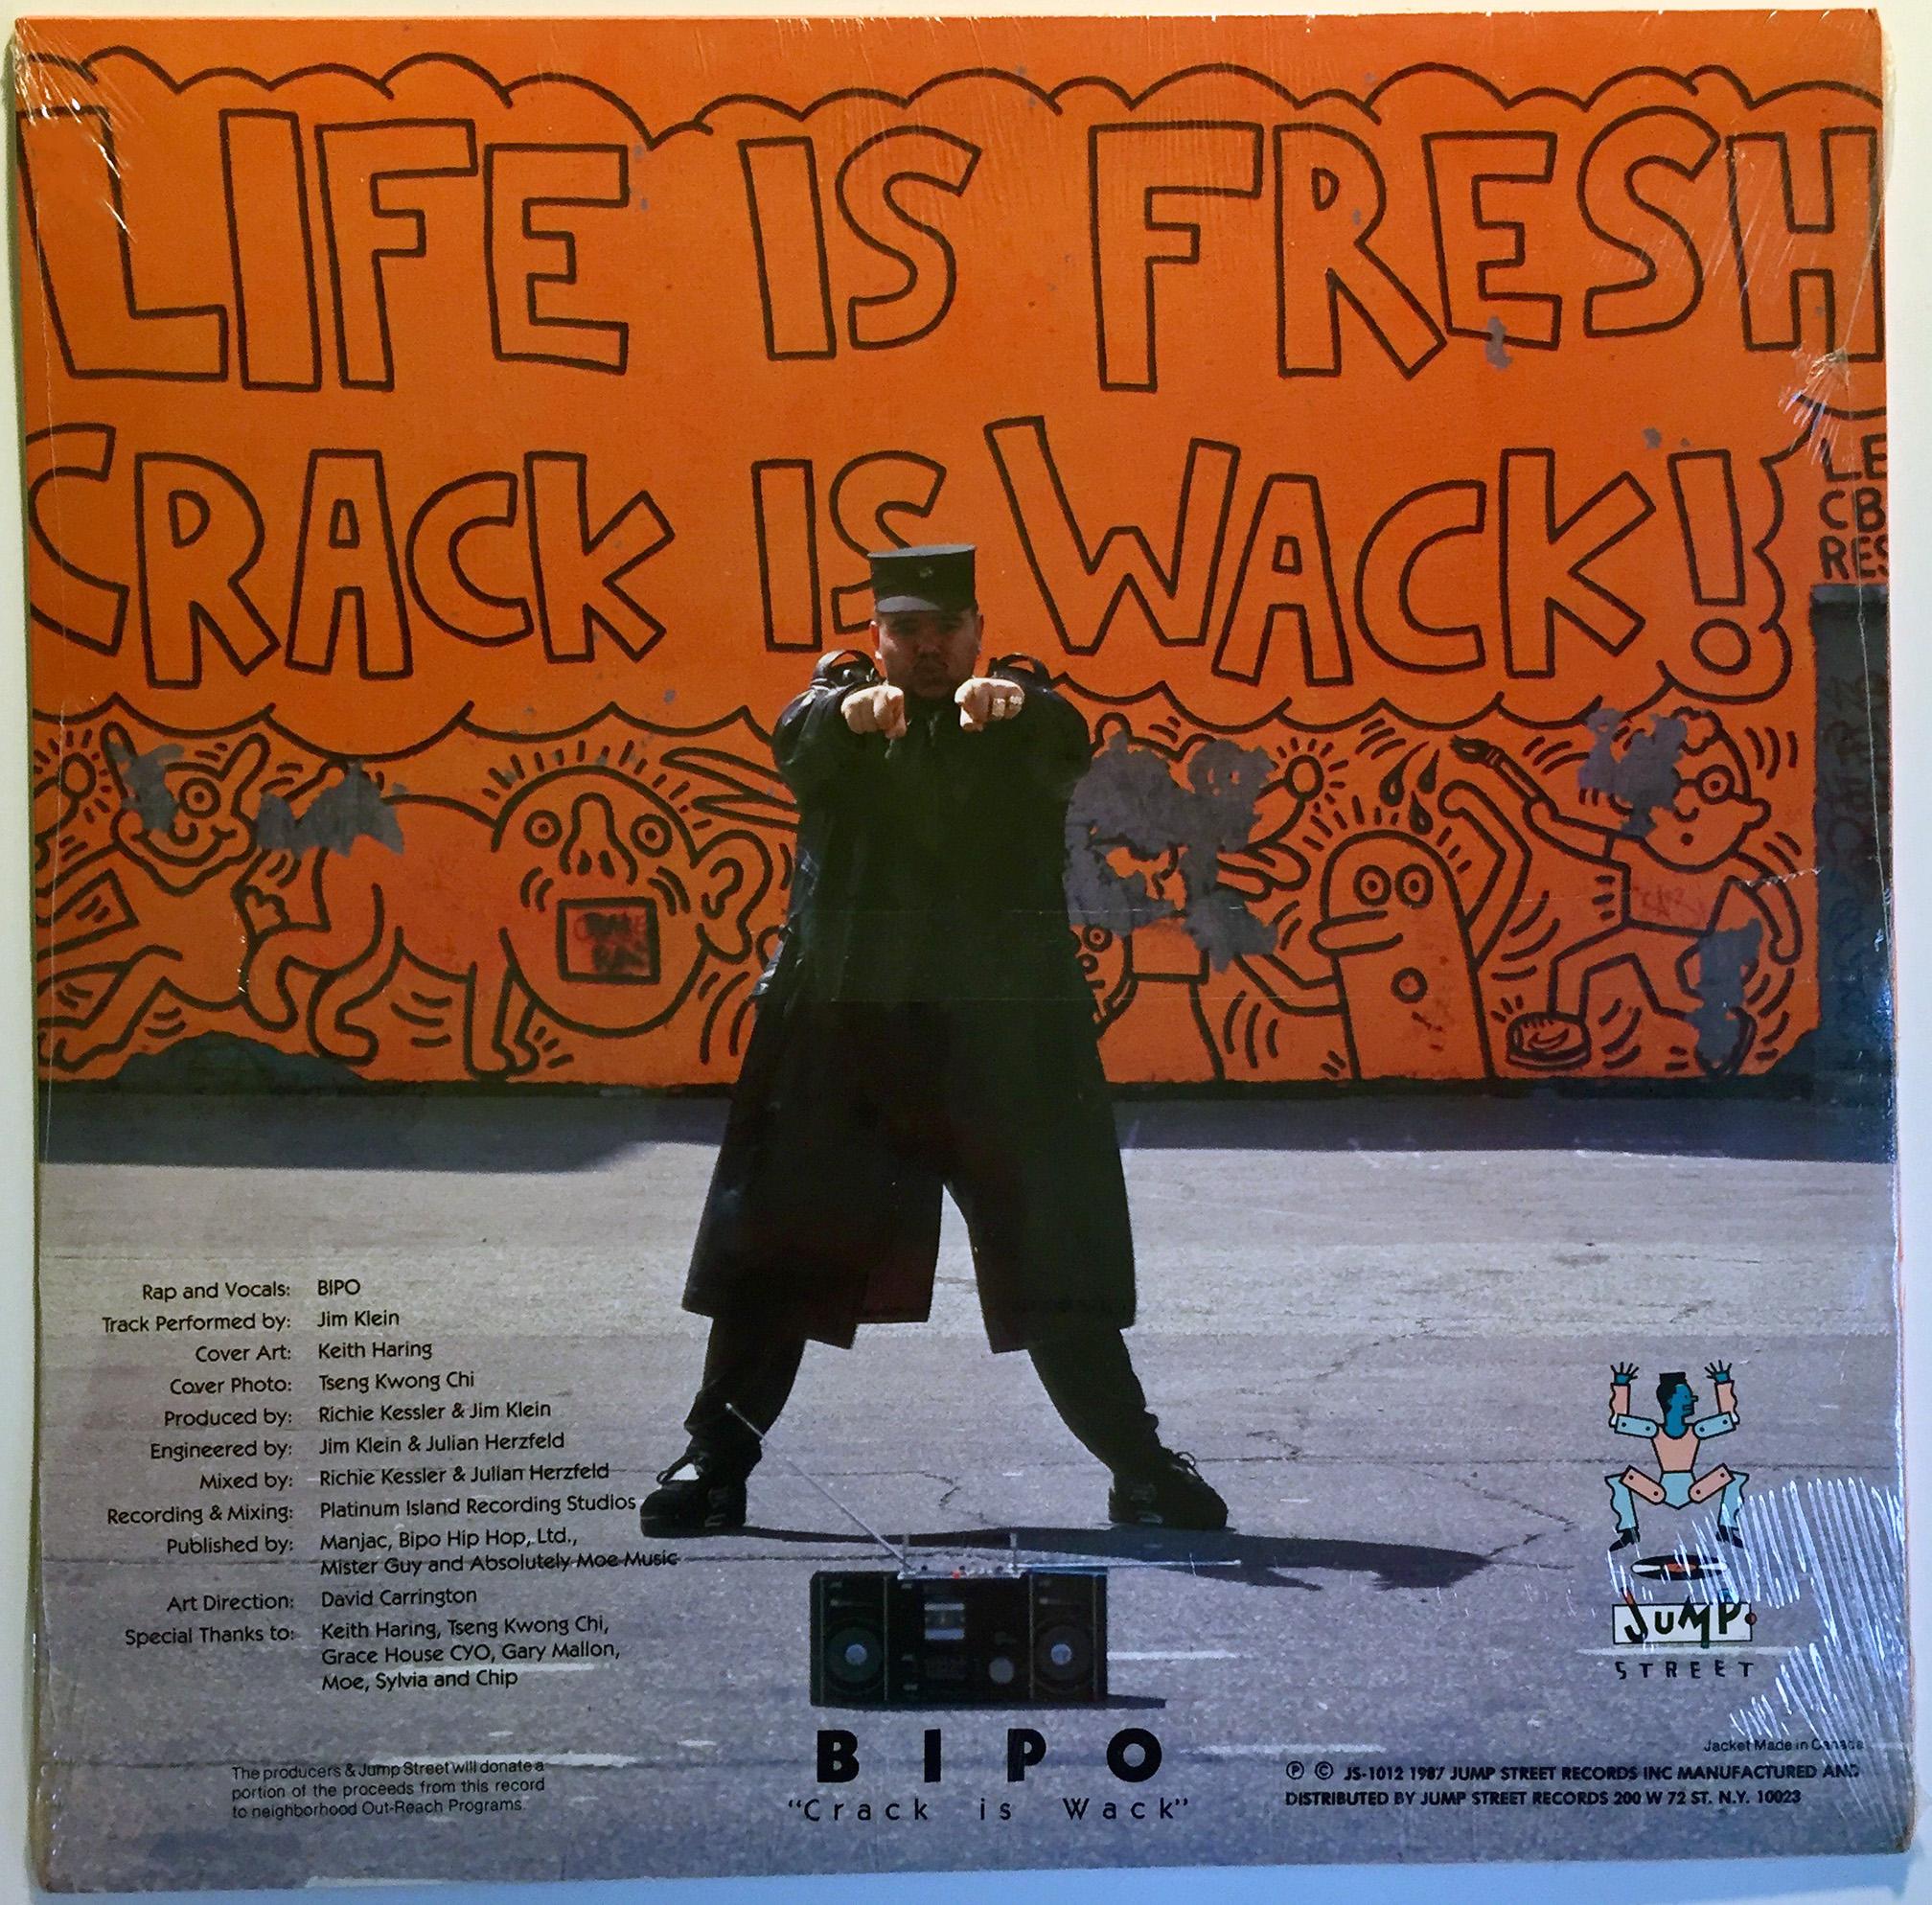 Keith Haring “Life is Fresh! Crack Is Wack!” 1987
Rare 1980s record album featuring original artwork by Keith Haring. 

Haring's cover illustration here for his friend at the time, Bipo, is inspired by his famous 1986 Harlem mural by the same title